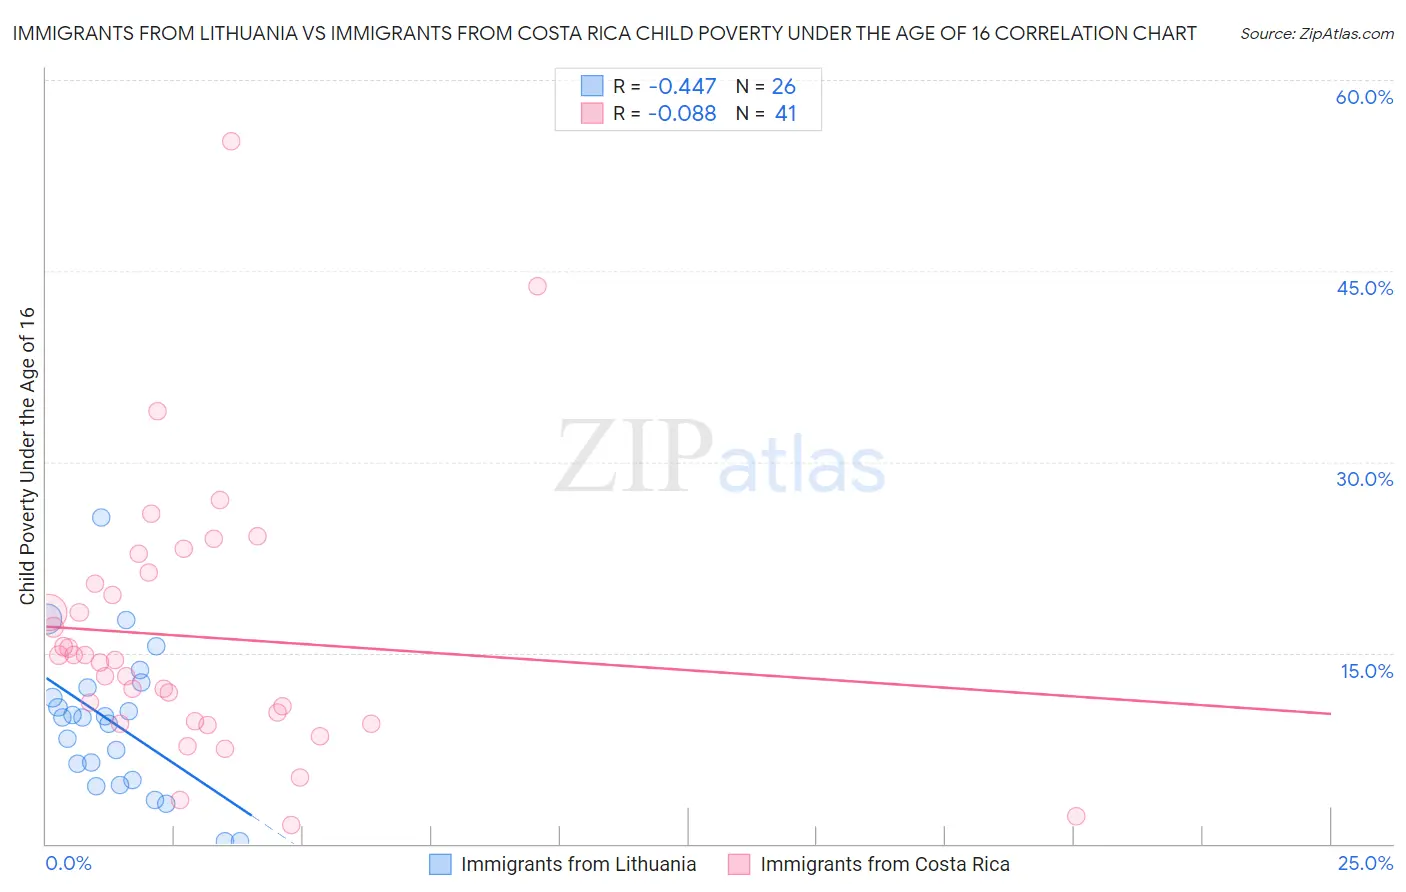 Immigrants from Lithuania vs Immigrants from Costa Rica Child Poverty Under the Age of 16